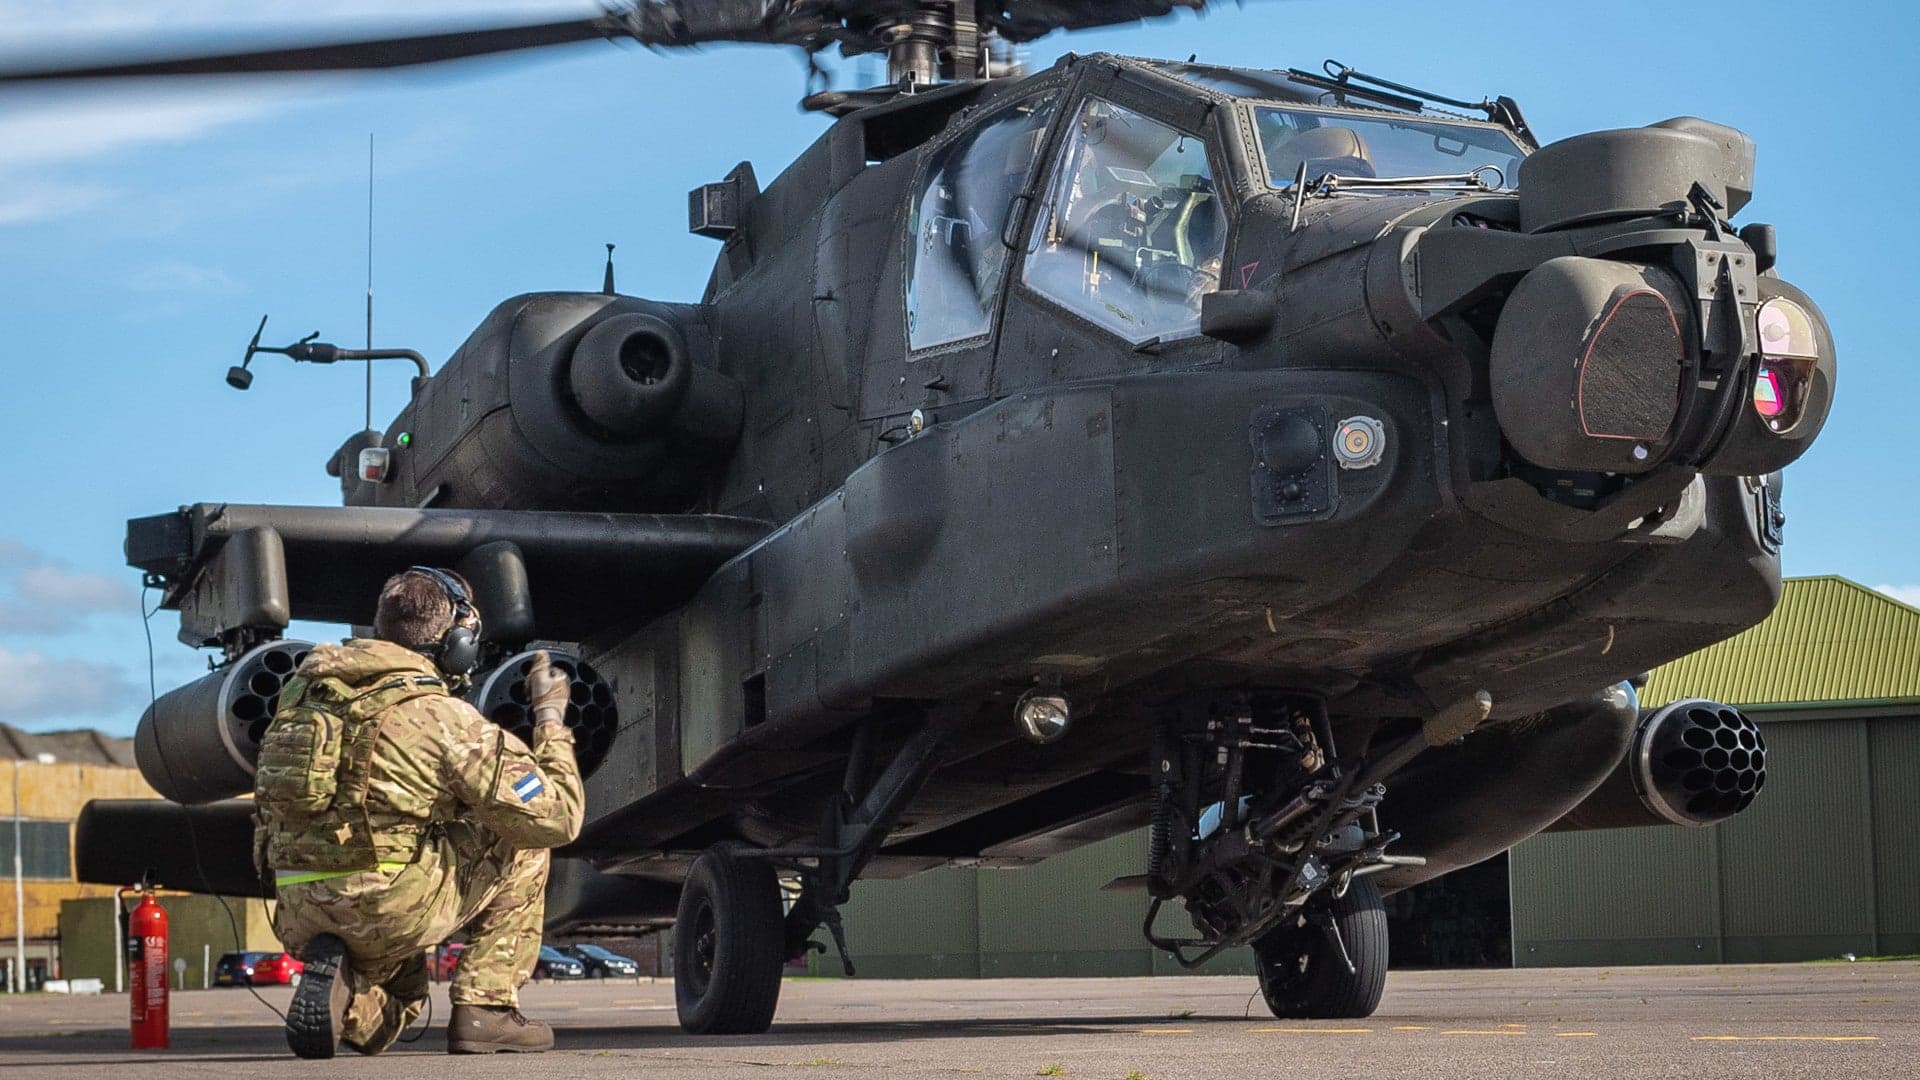 British Army Apache Gunship’s 30mm Cannon Accidentally Fires During Maintenance